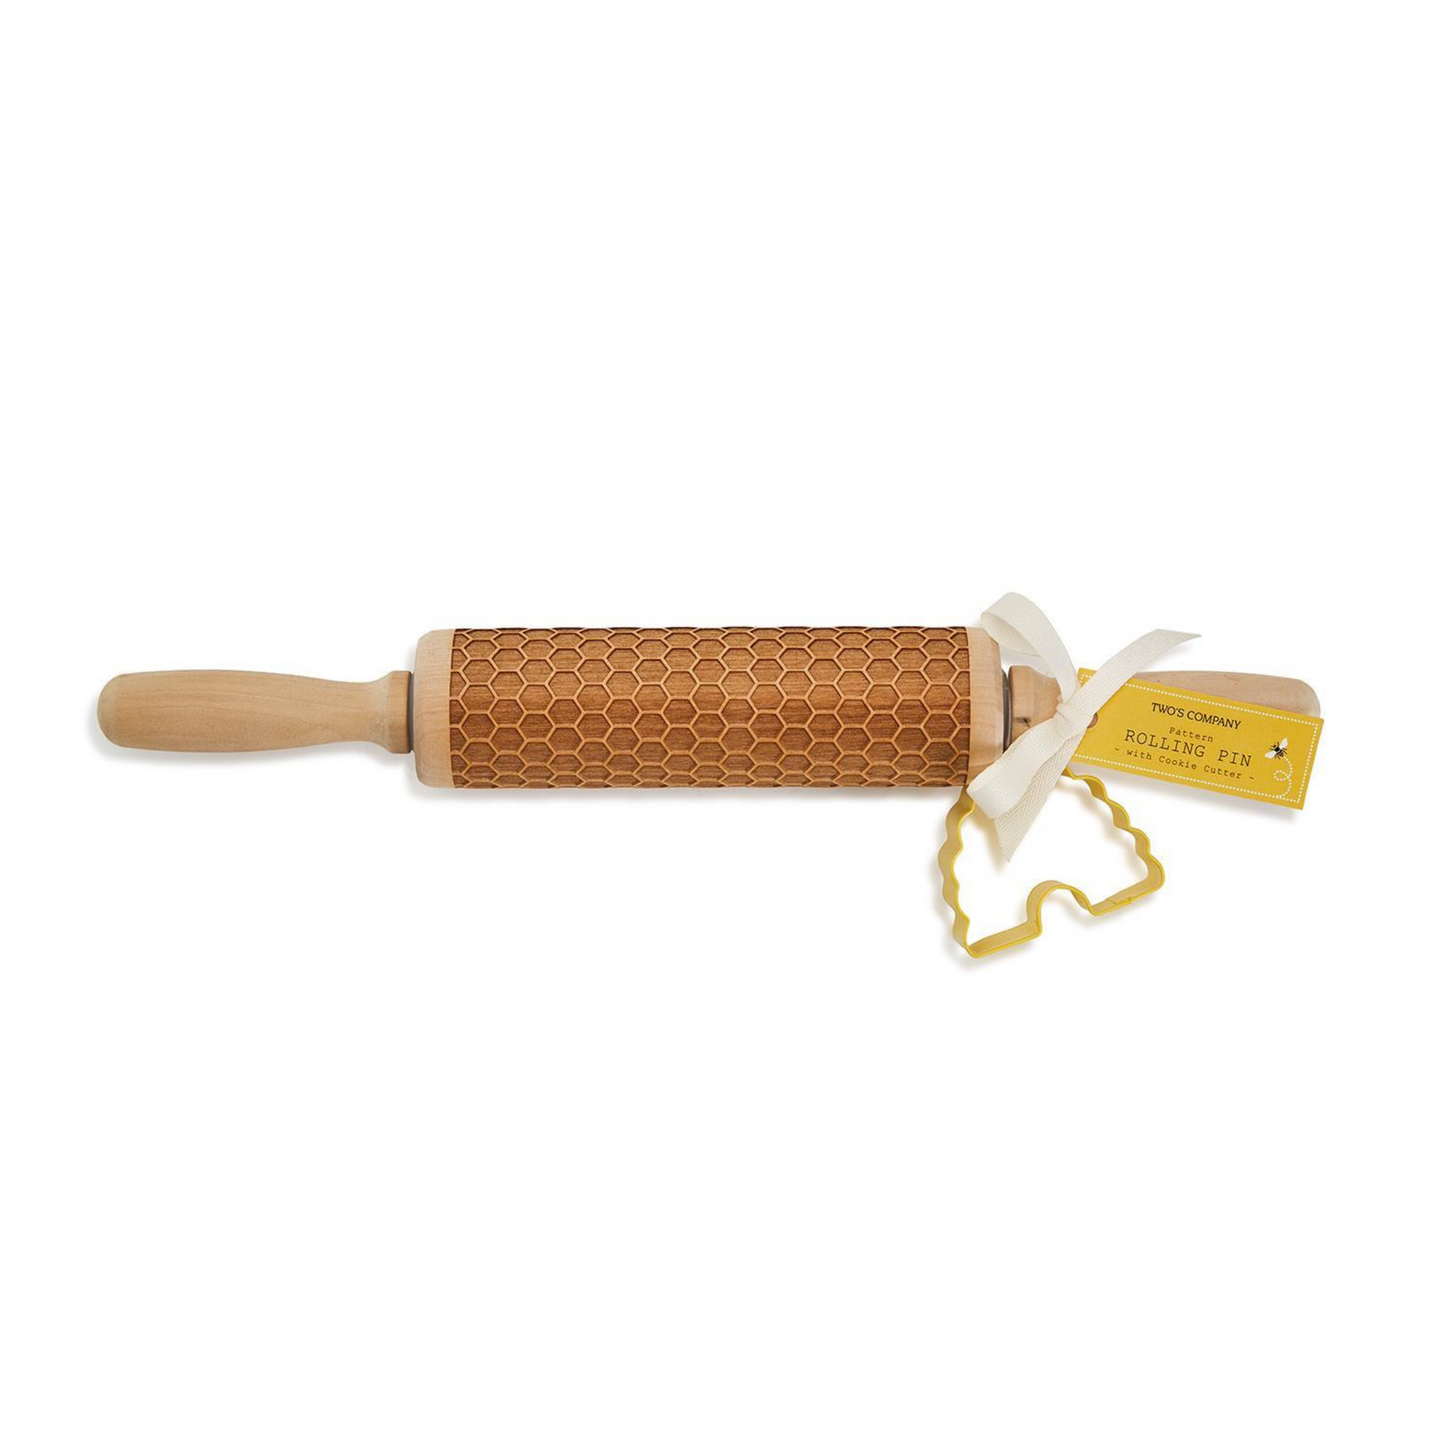 Honeycomb rolling pin with Cookie cutter